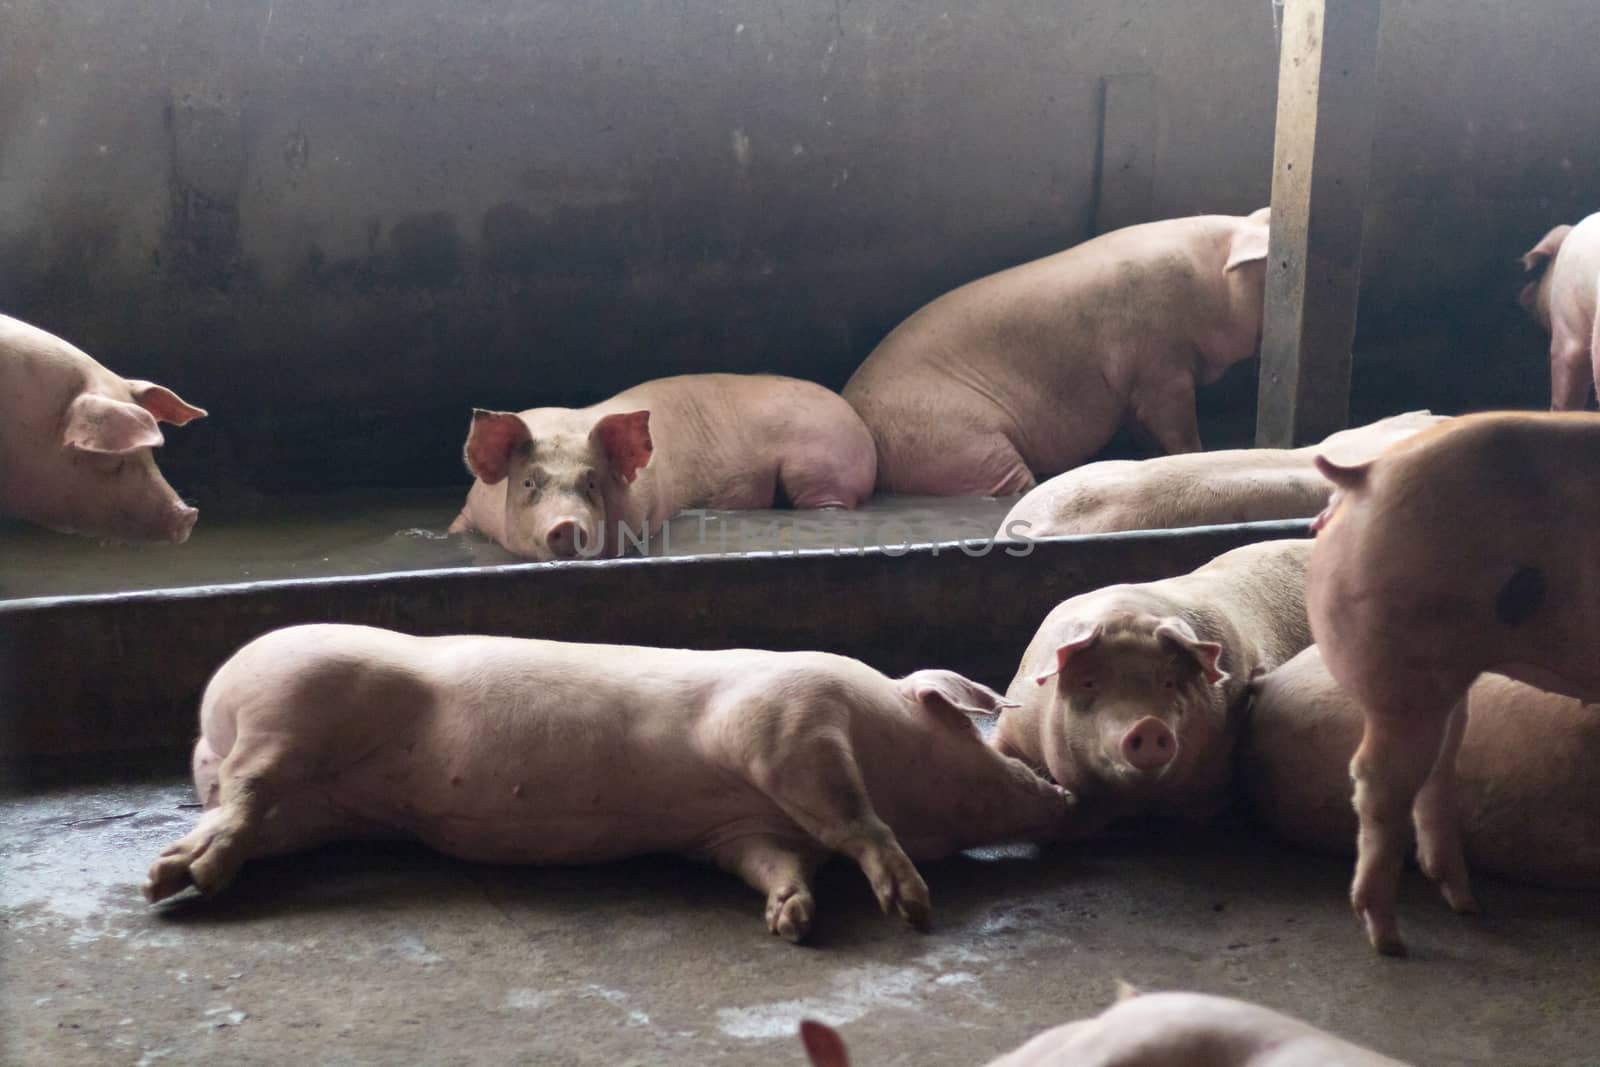 Pigs sleep on the pig farms after eating. Pigs on the farm are closed in the building. by minamija